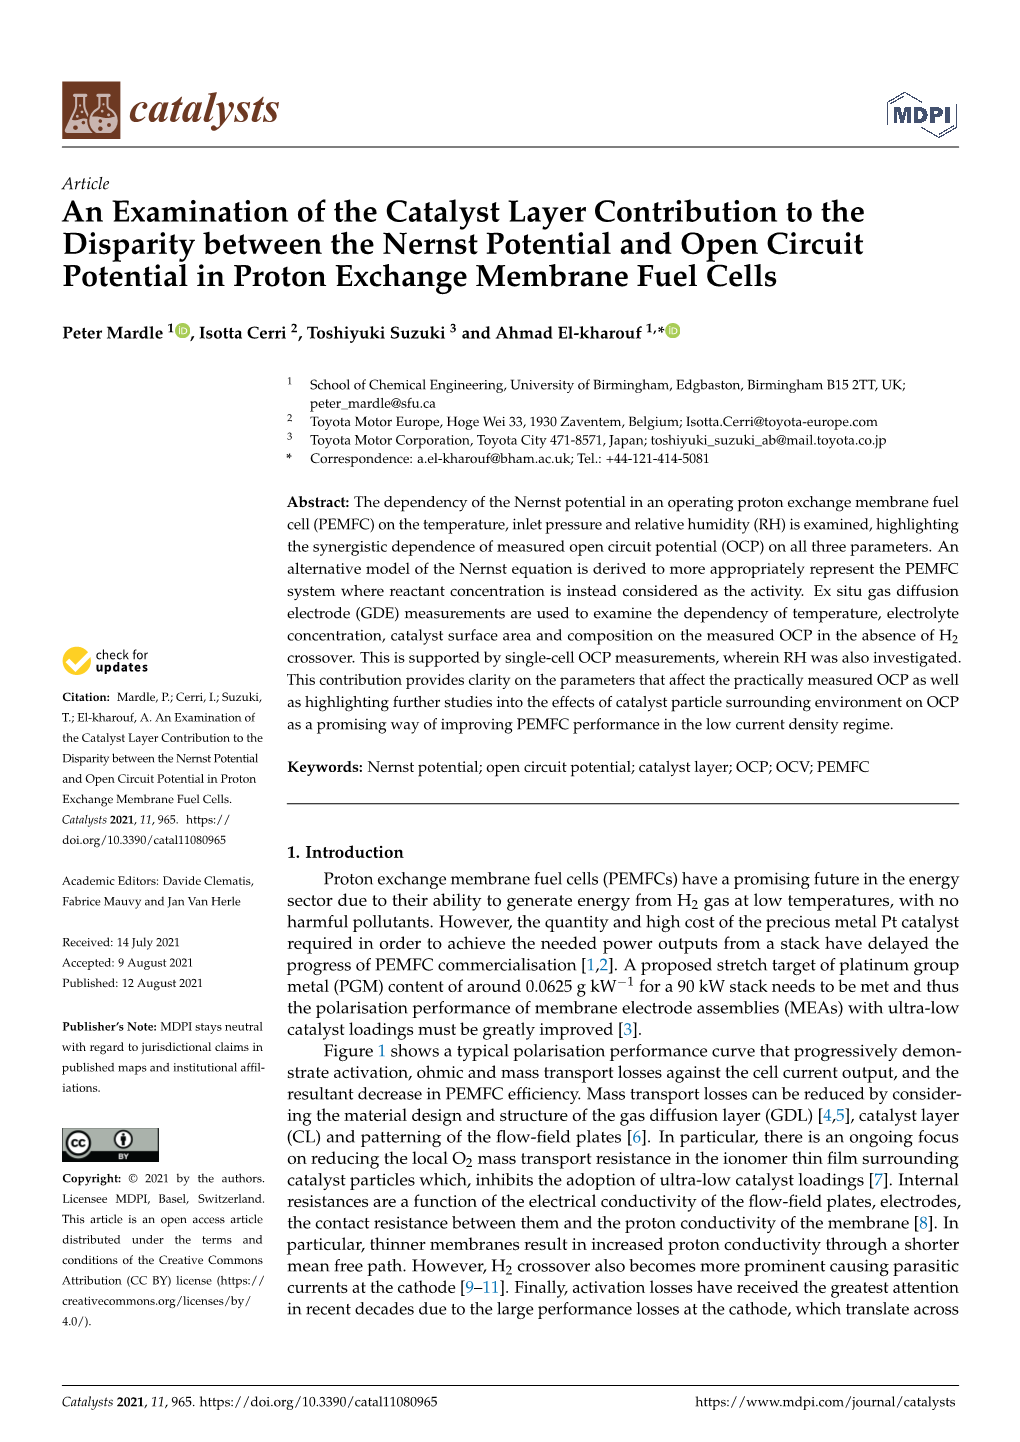 An Examination of the Catalyst Layer Contribution to the Disparity Between the Nernst Potential and Open Circuit Potential in Proton Exchange Membrane Fuel Cells